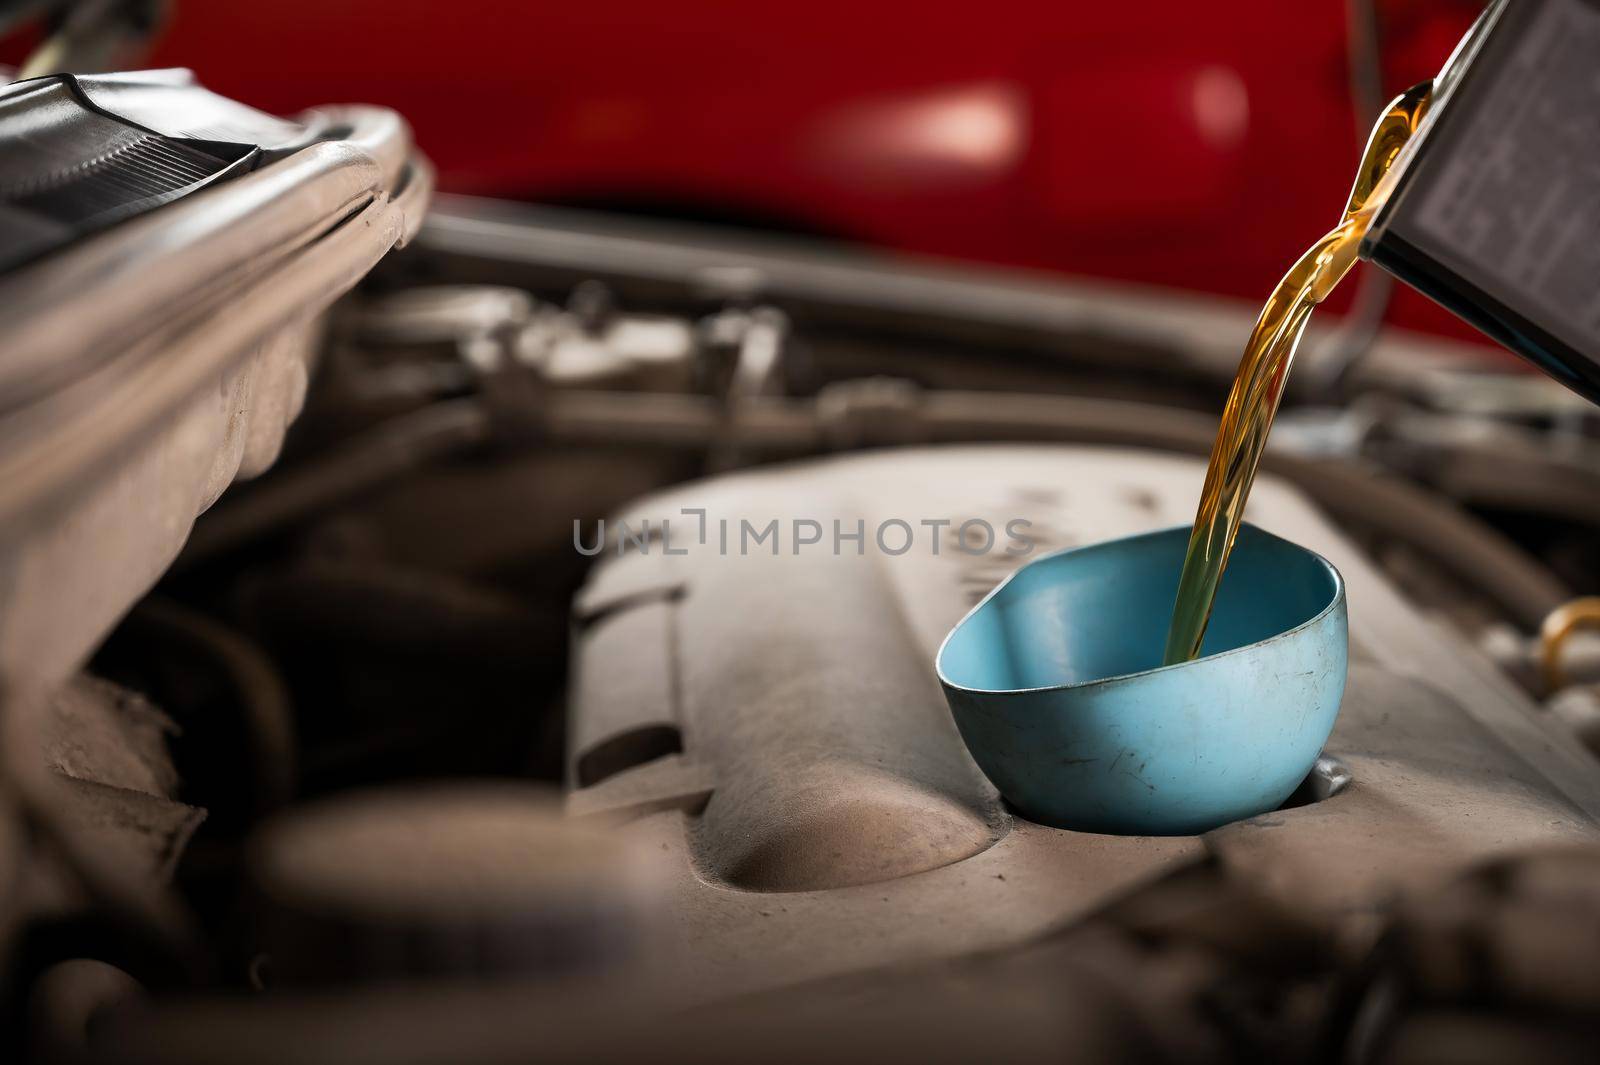 Auto mechanic pours oil into a car engine. by mrwed54